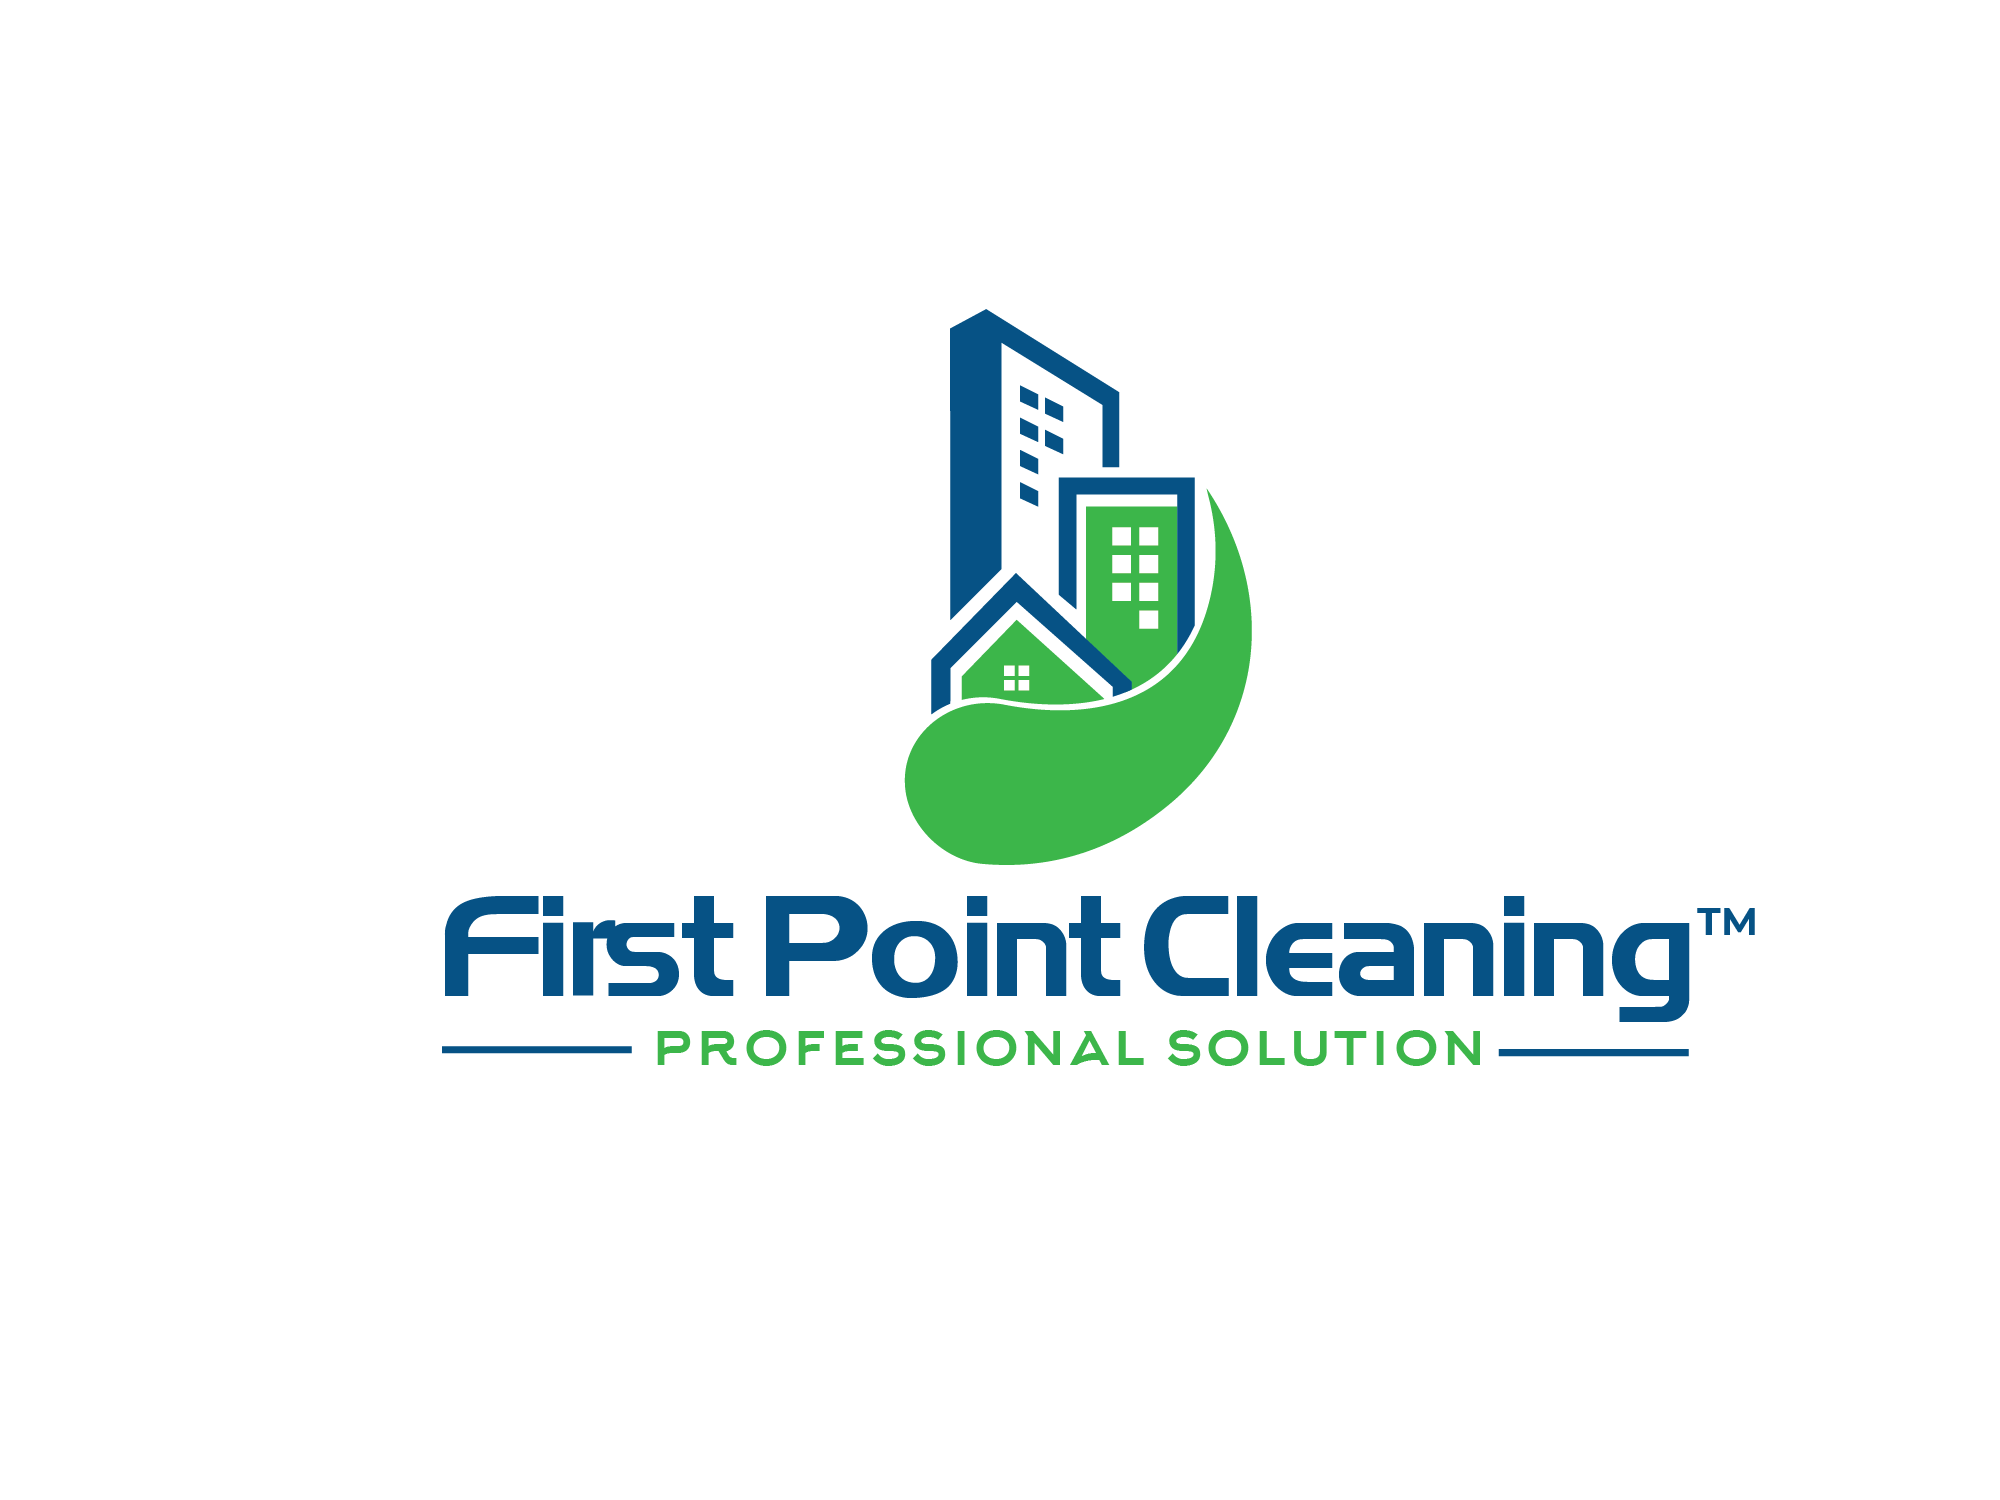 First Point Cleaning is specialised in Commercial Cleaning and Maintenance Services.